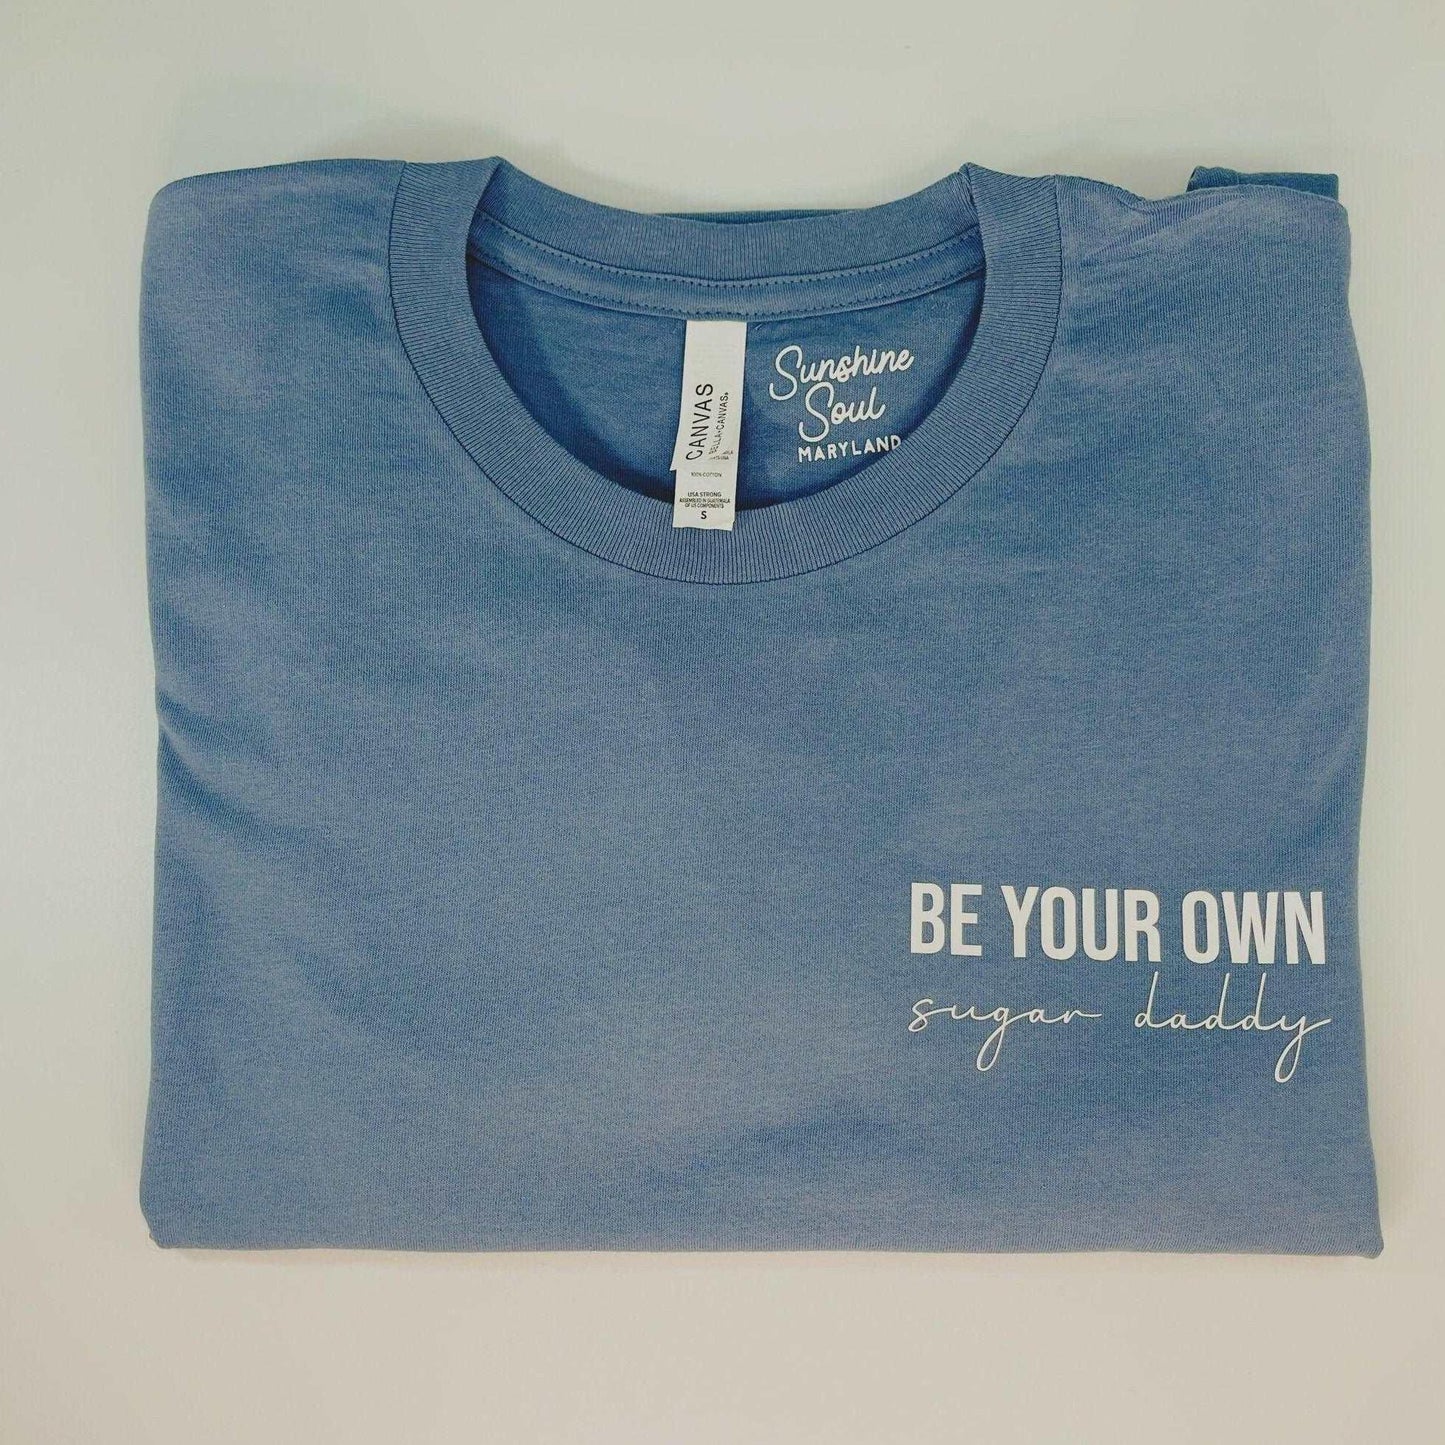 Be Your Own Sugar Daddy T-Shirt - Sunshine Soul MD